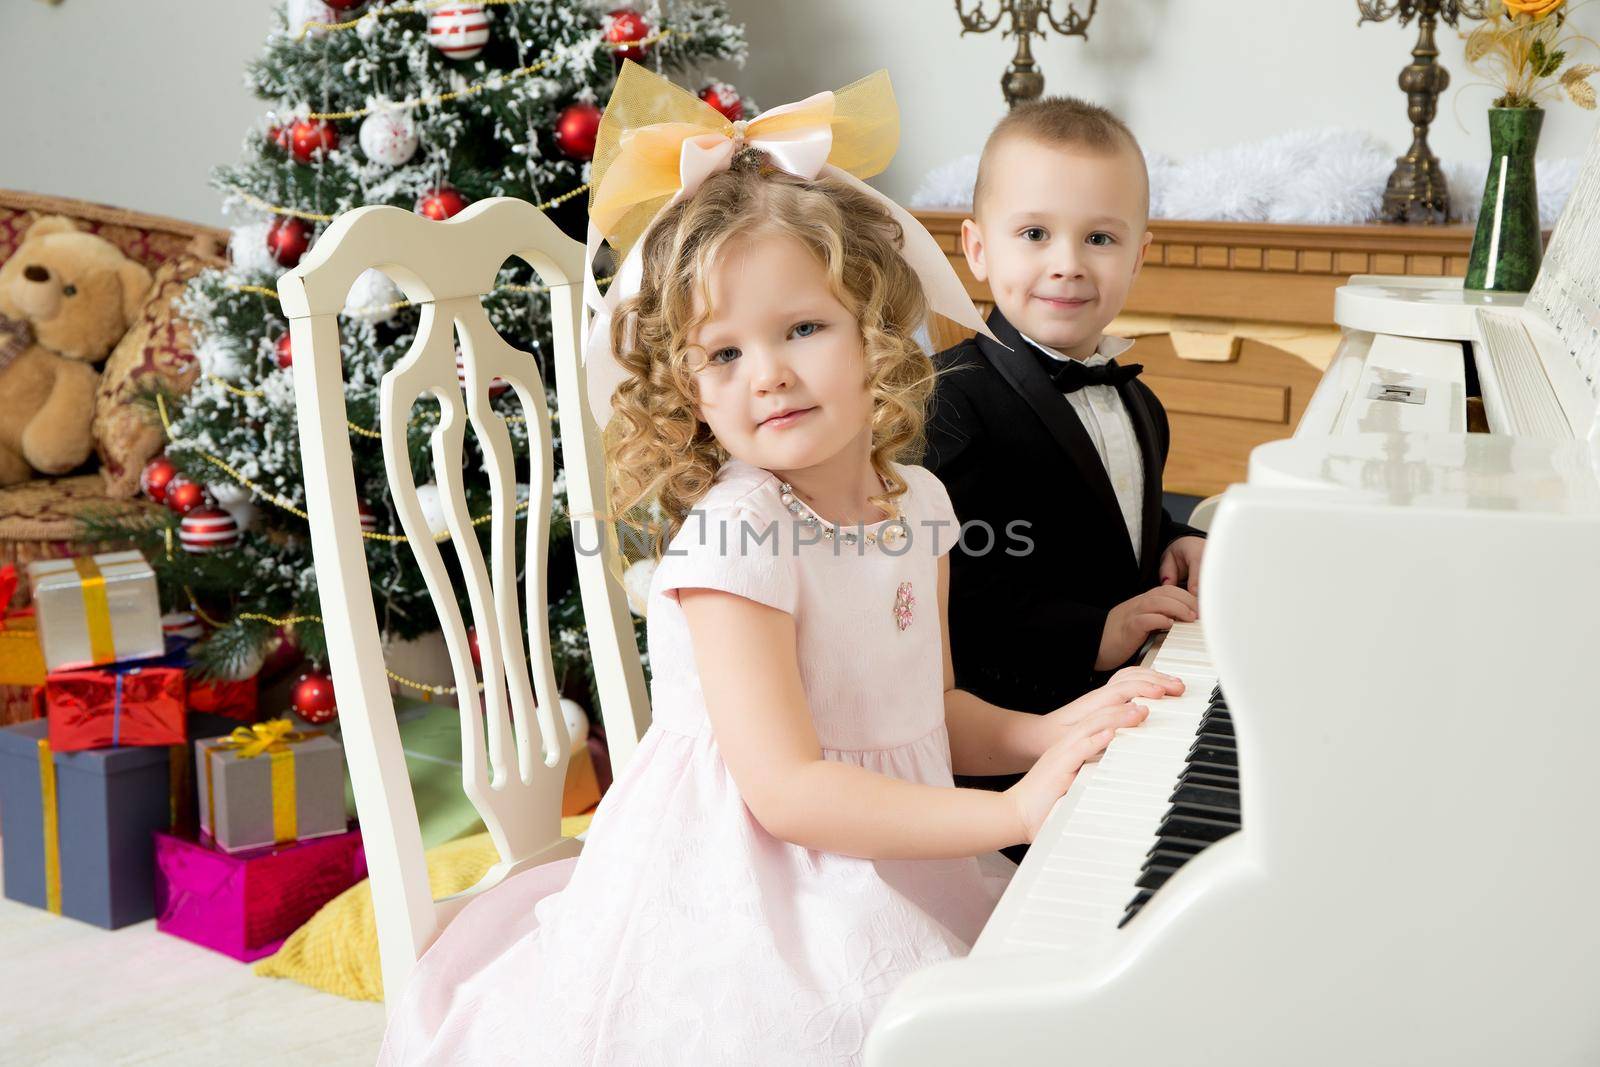 Solemnly dressed little boy and girl into the night, sitting at a white piano. Children put hands on the keys.